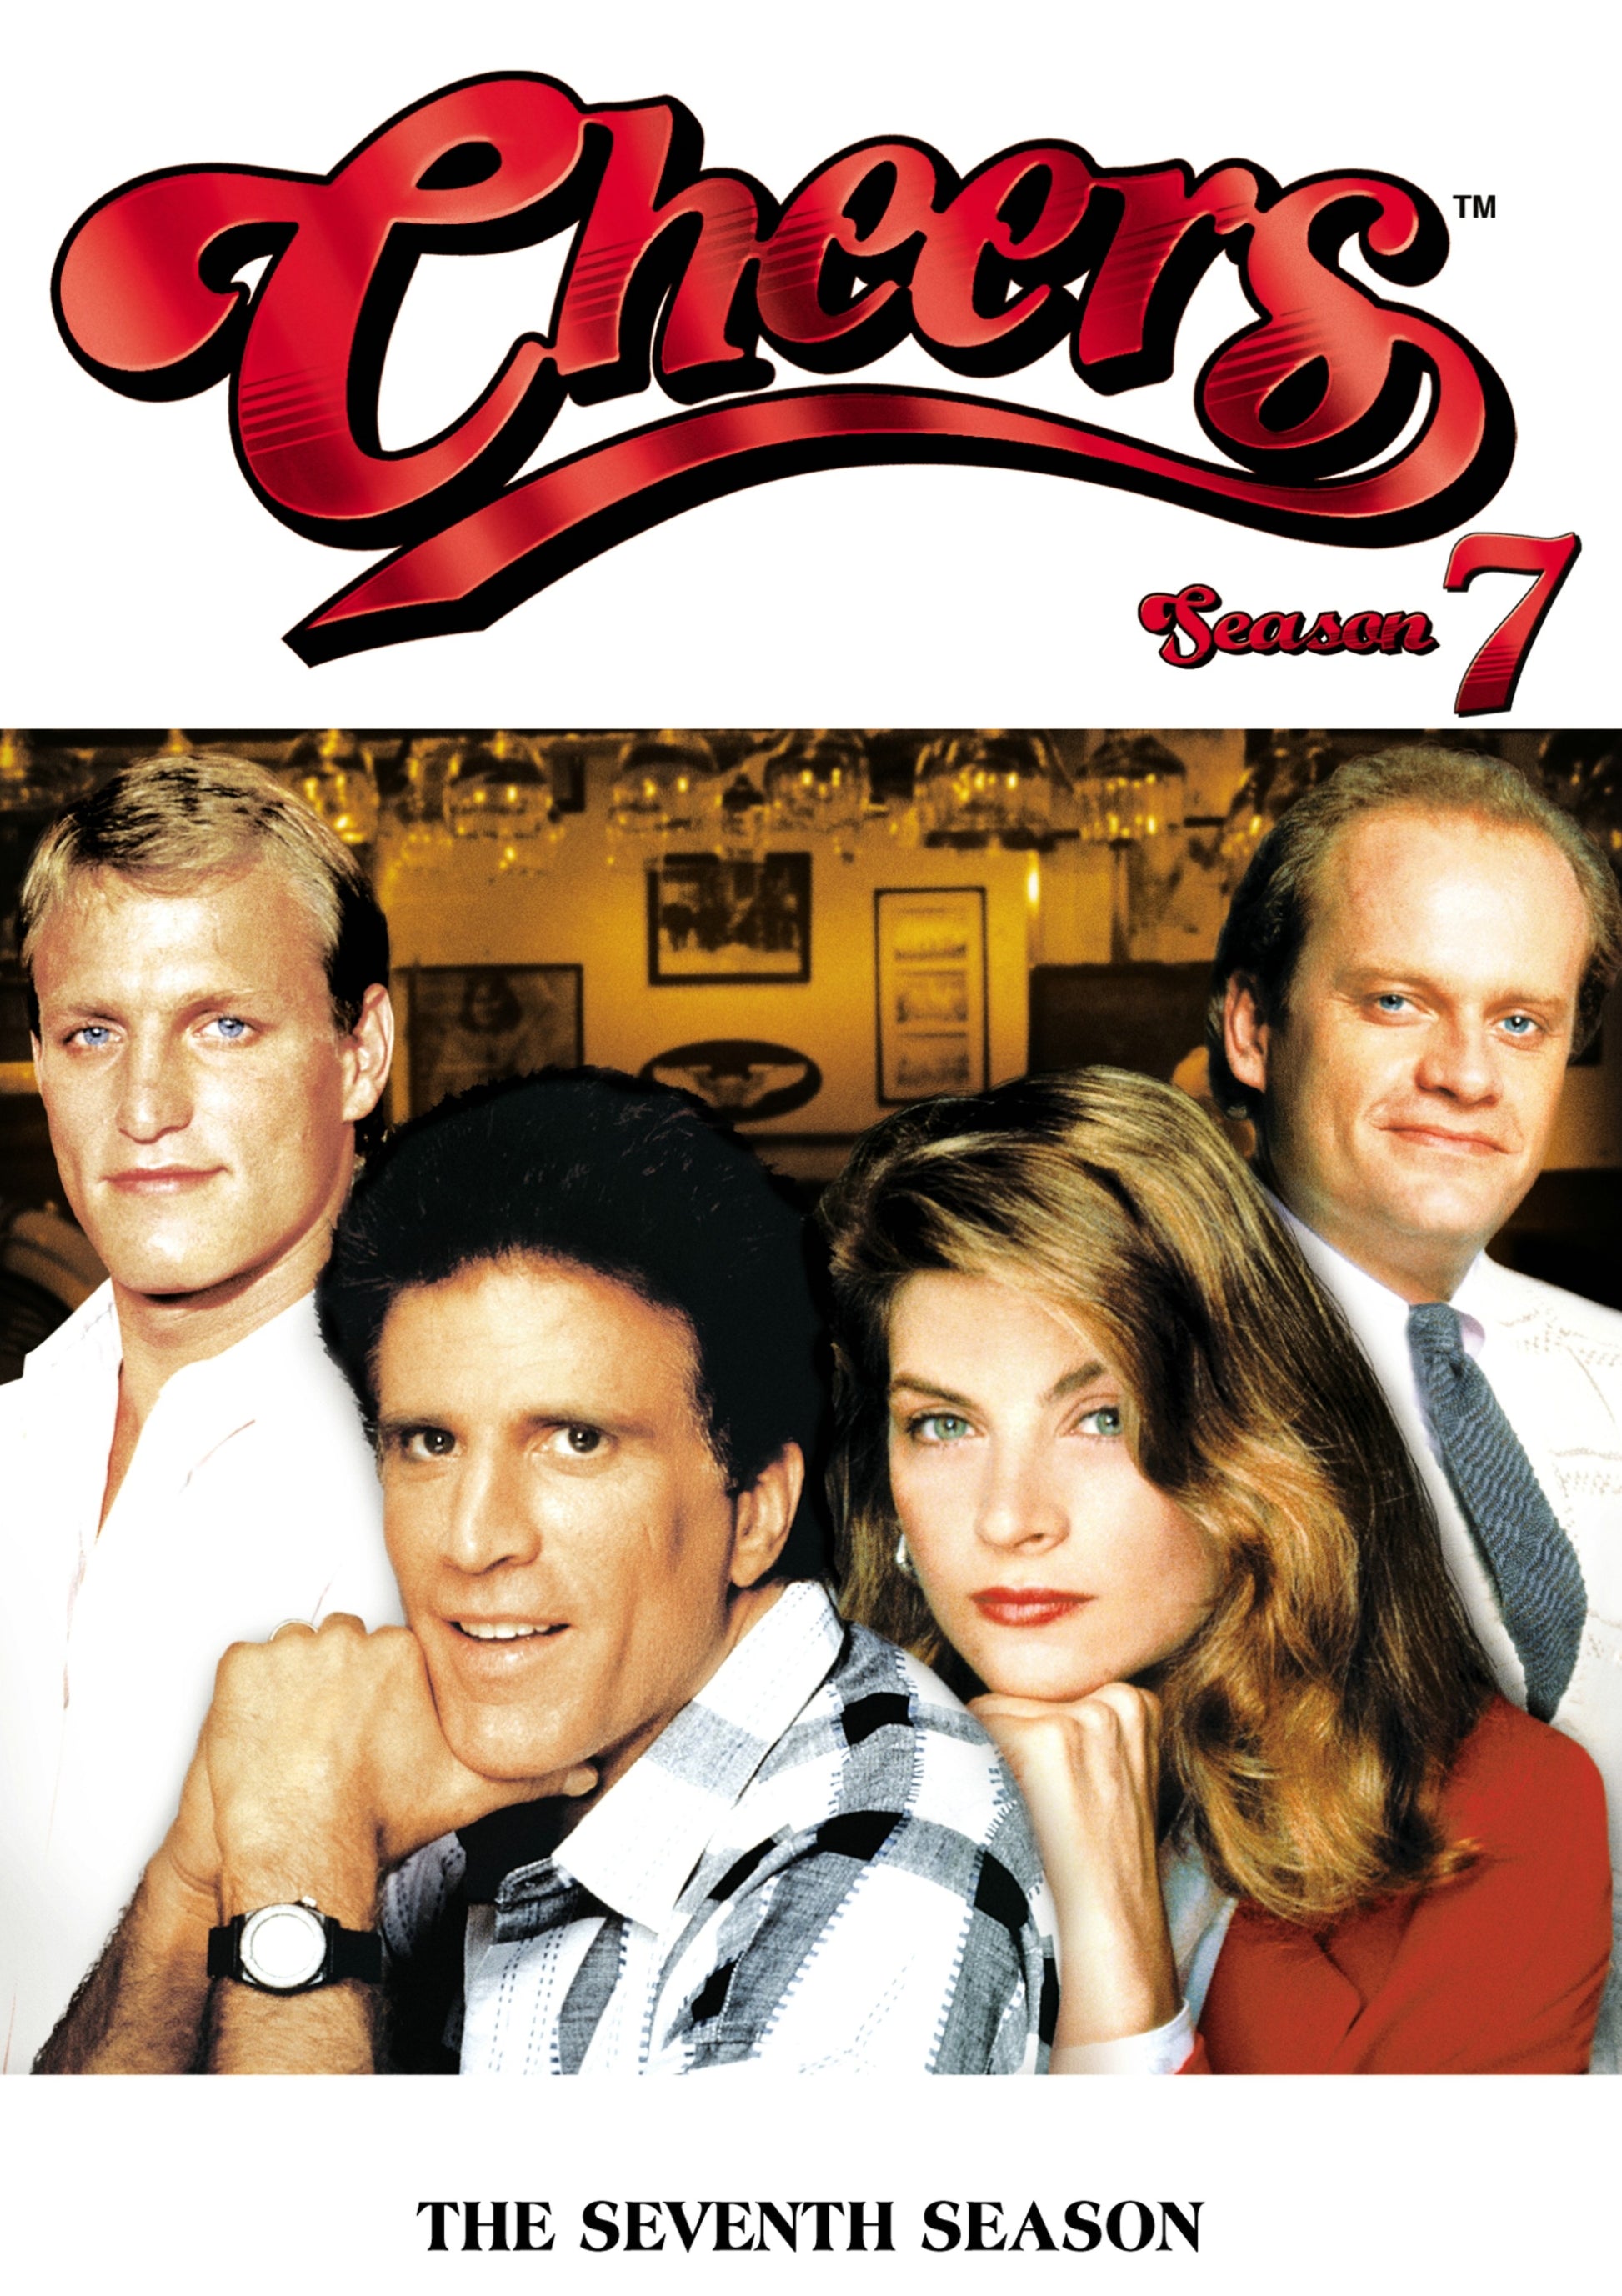 Cheers: The Complete Seventh Season [4 Discs] cover art